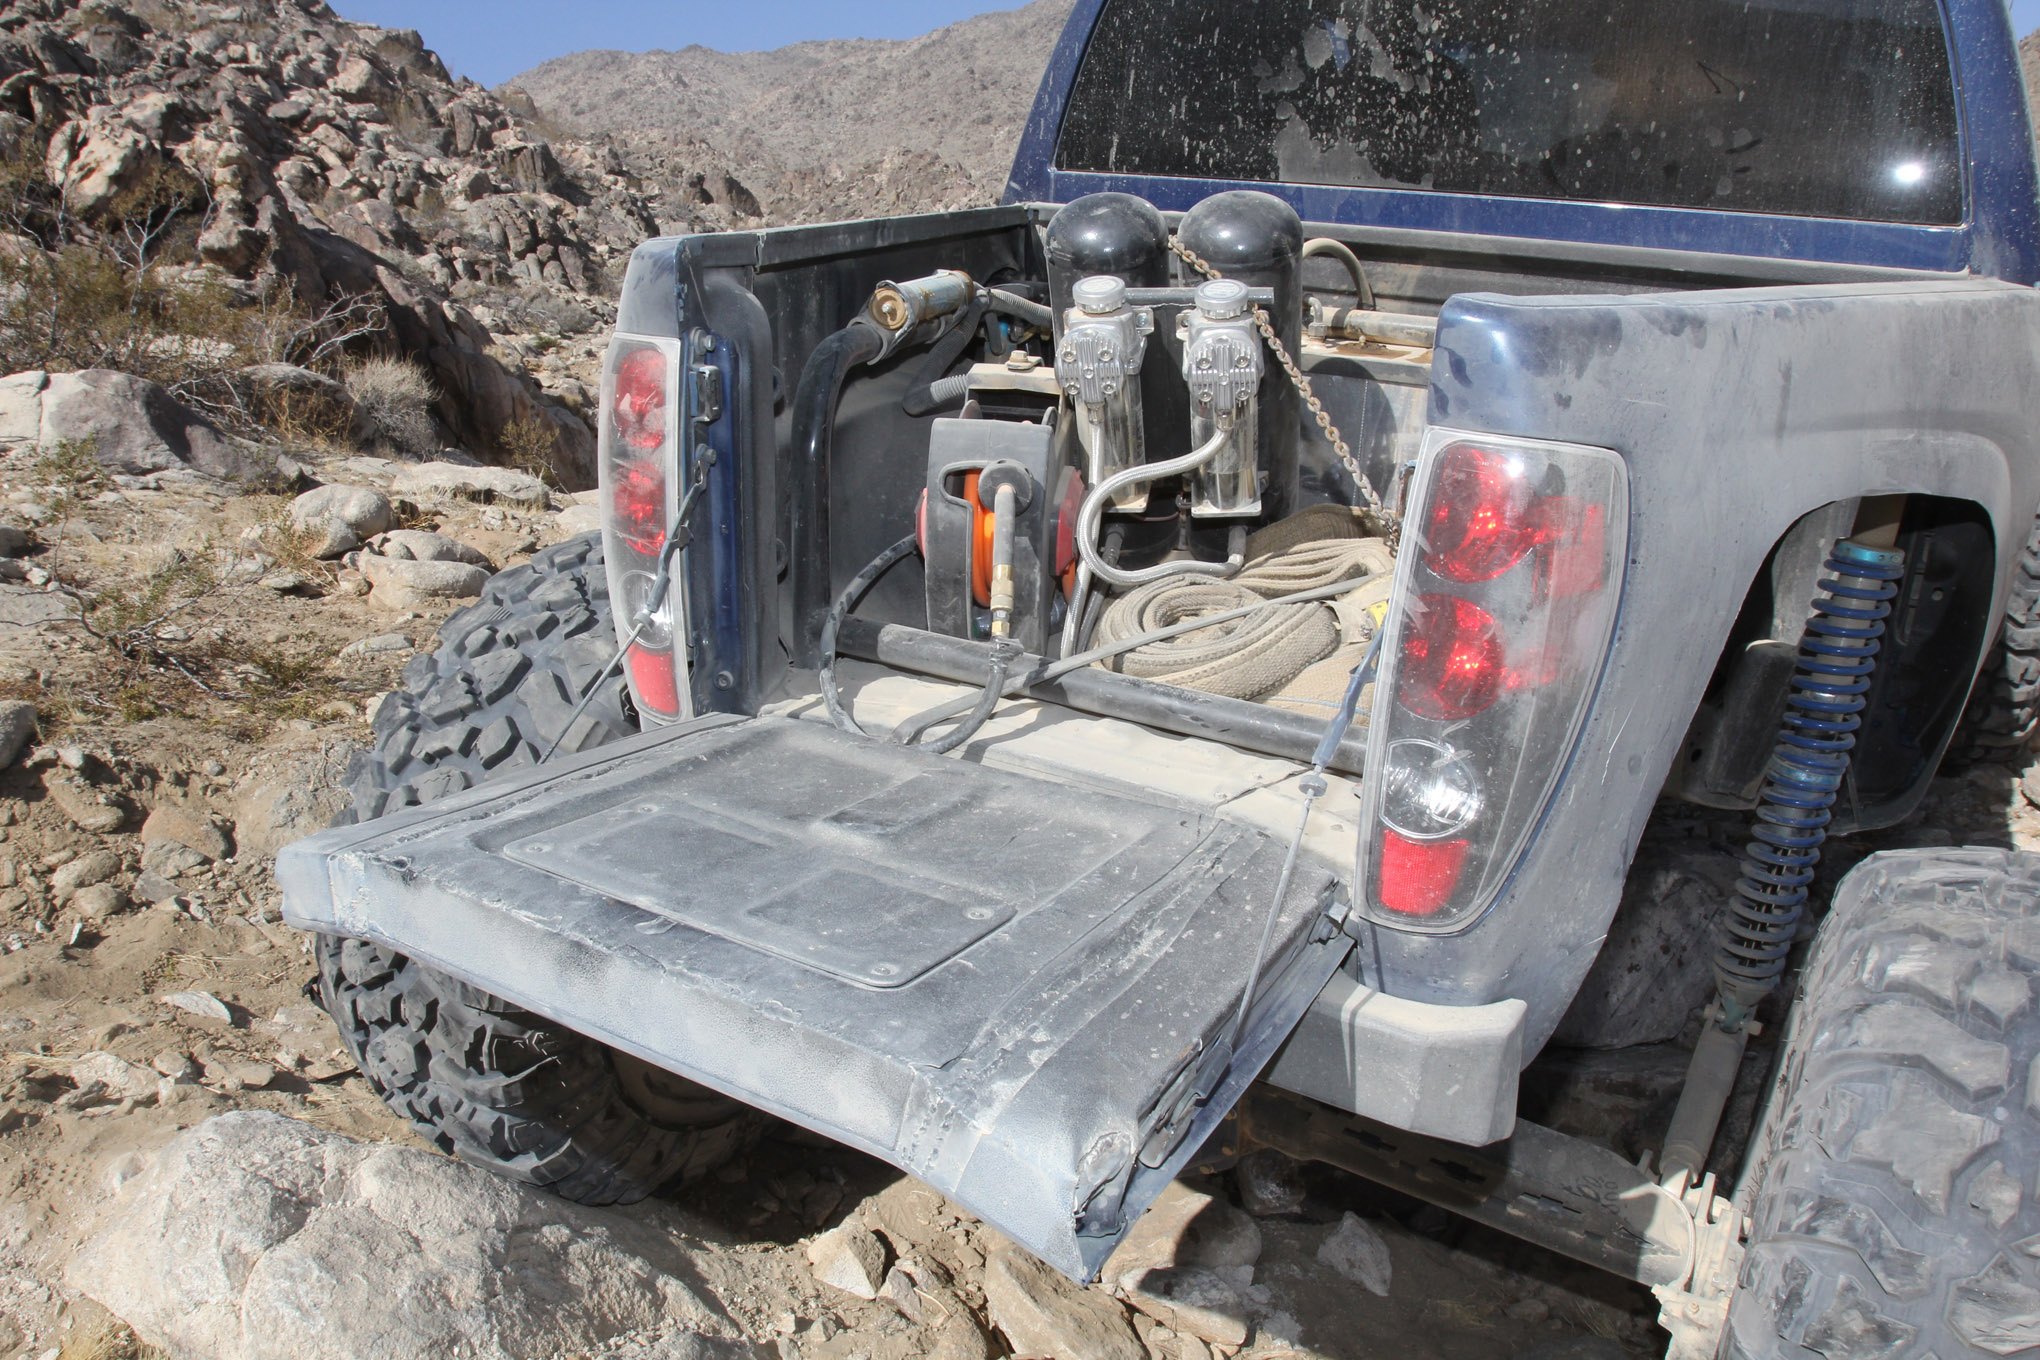 Blue Lifted Chevy Colorado with Trunk Nitrous Kit - Photo by fourwheeler.com